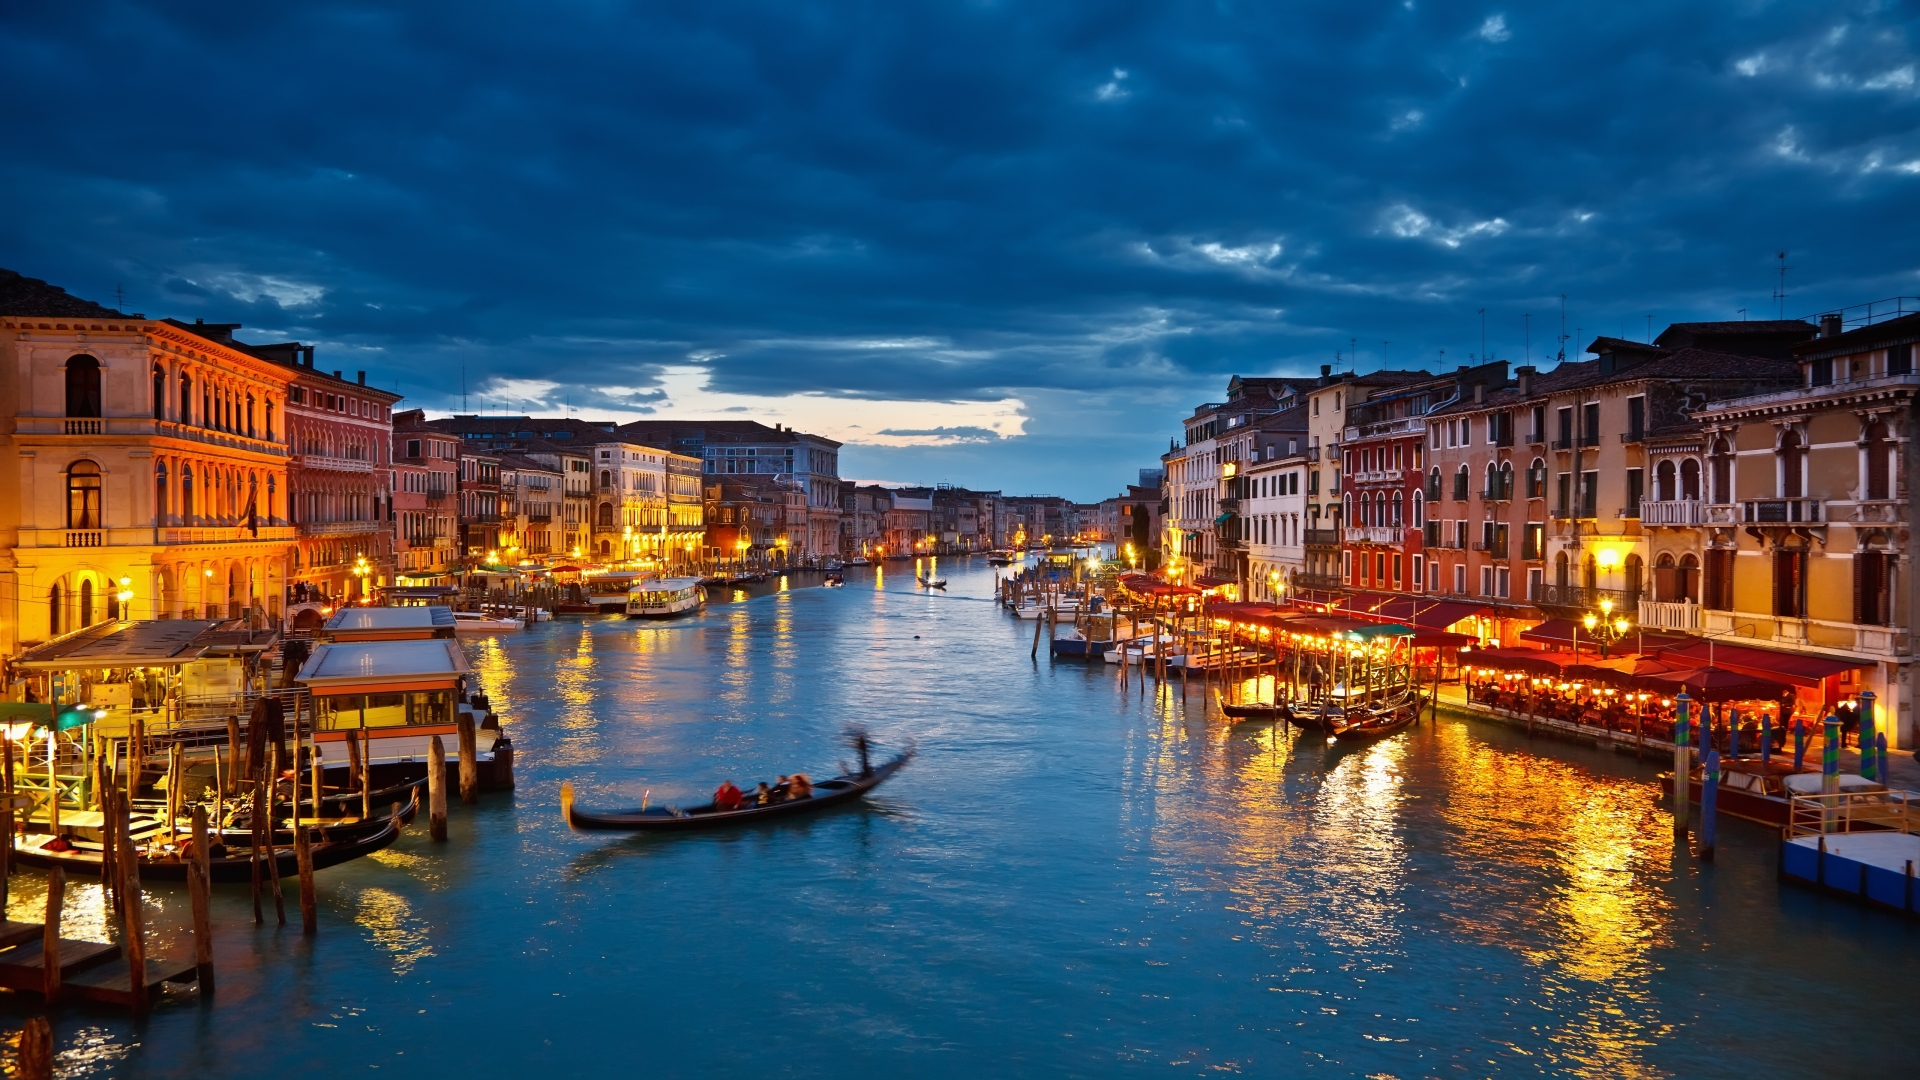 Venice Italy for 1920 x 1080 HDTV 1080p resolution